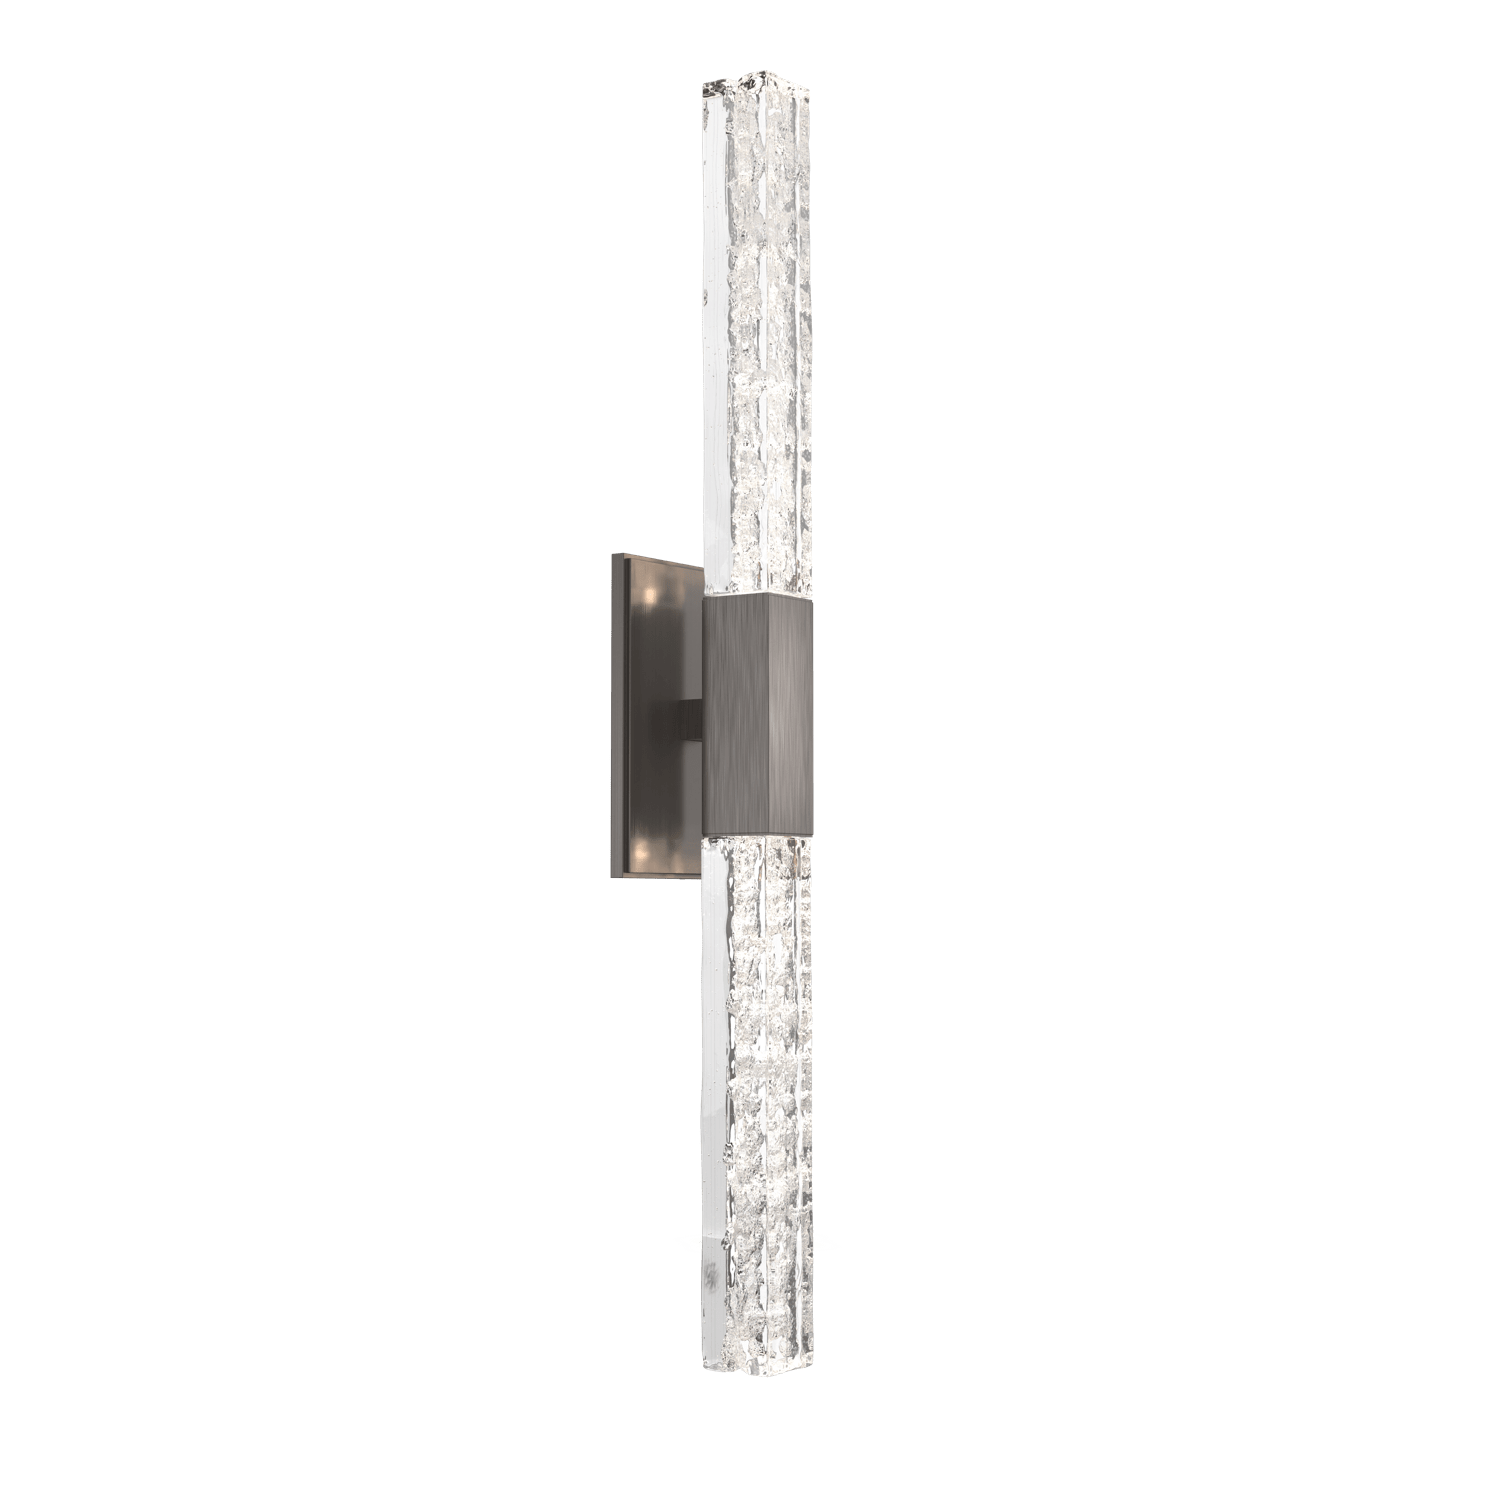 IDB0060-02-GM-GC-Hammerton-Studio-Axis-Double-Wall-Sconce-with-Gunmetal-finish-and-clear-cast-glass-and-LED-lamping